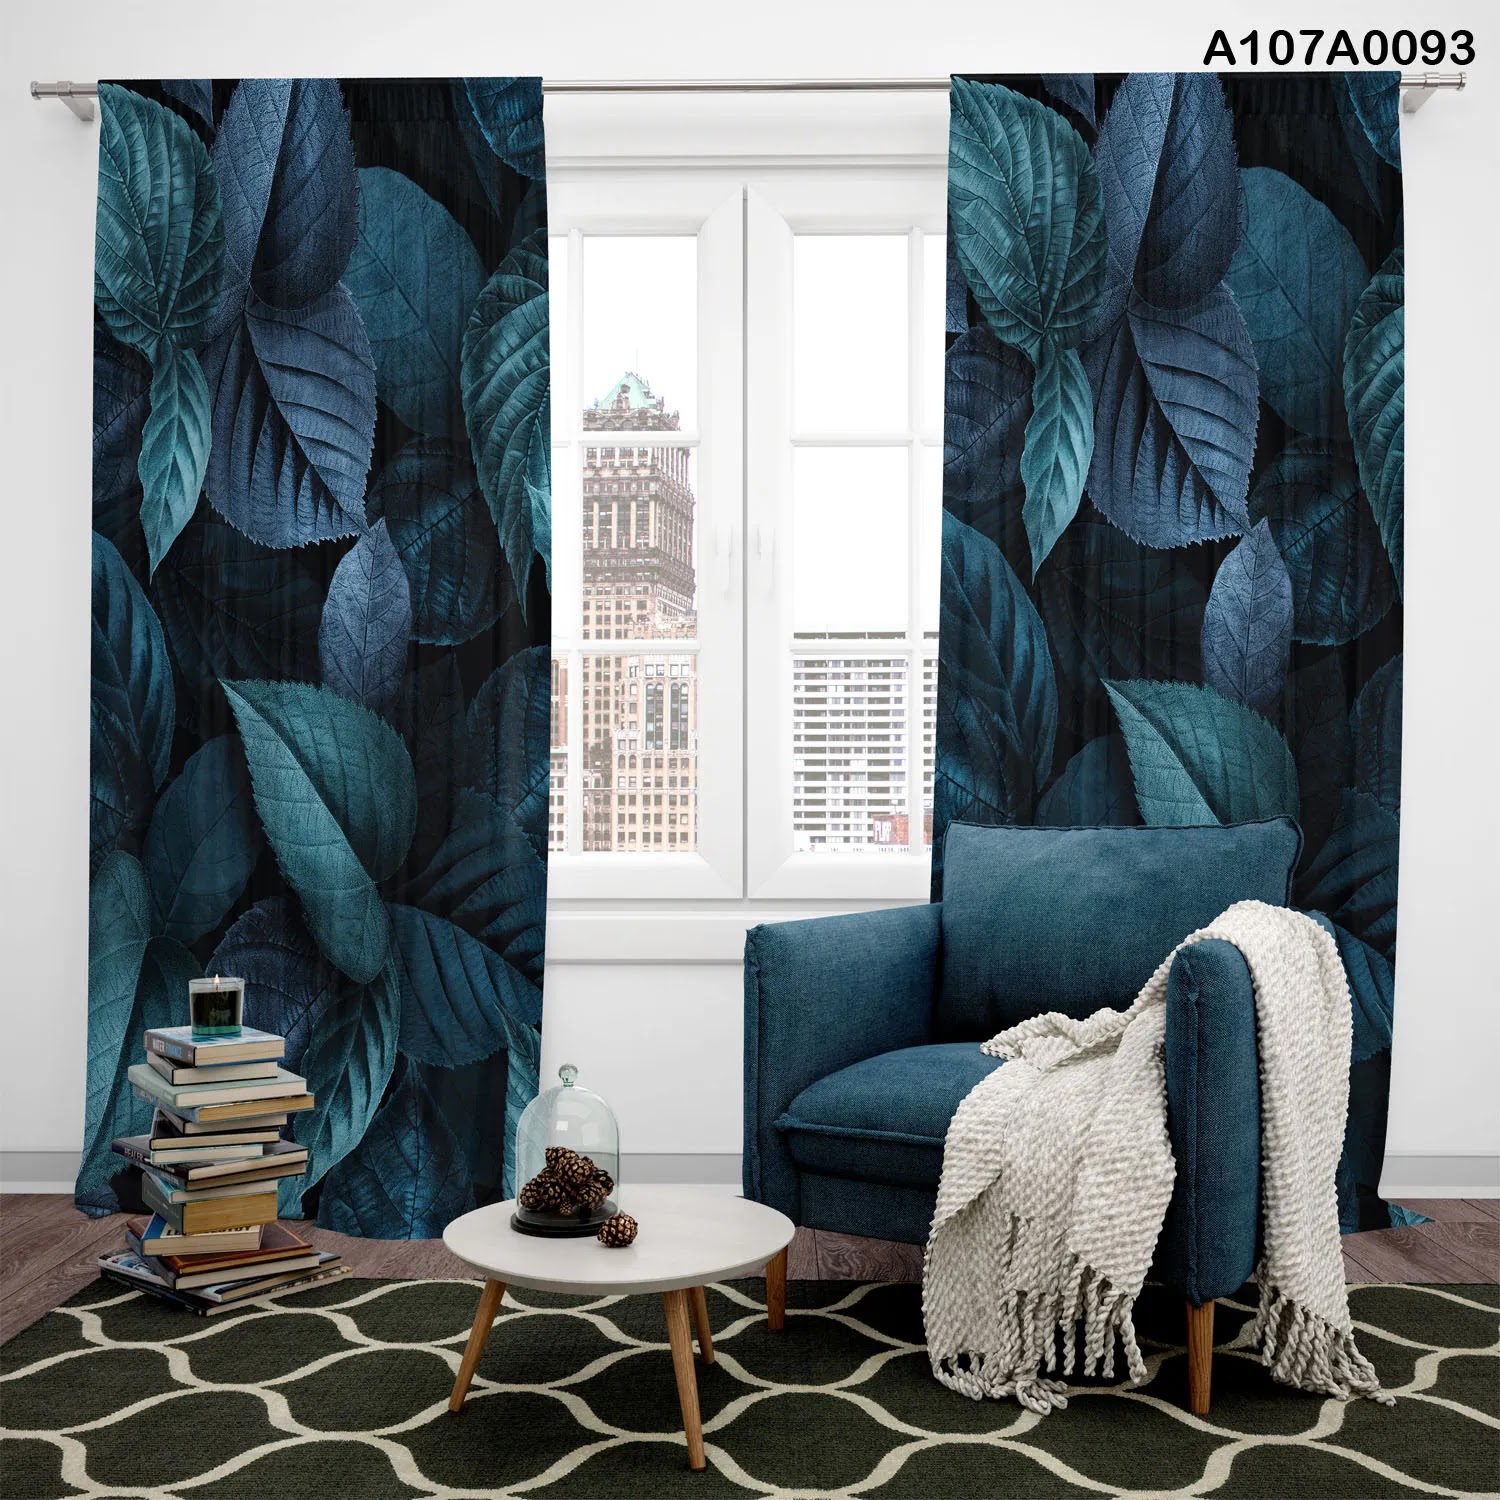 Curtains with dark leavs